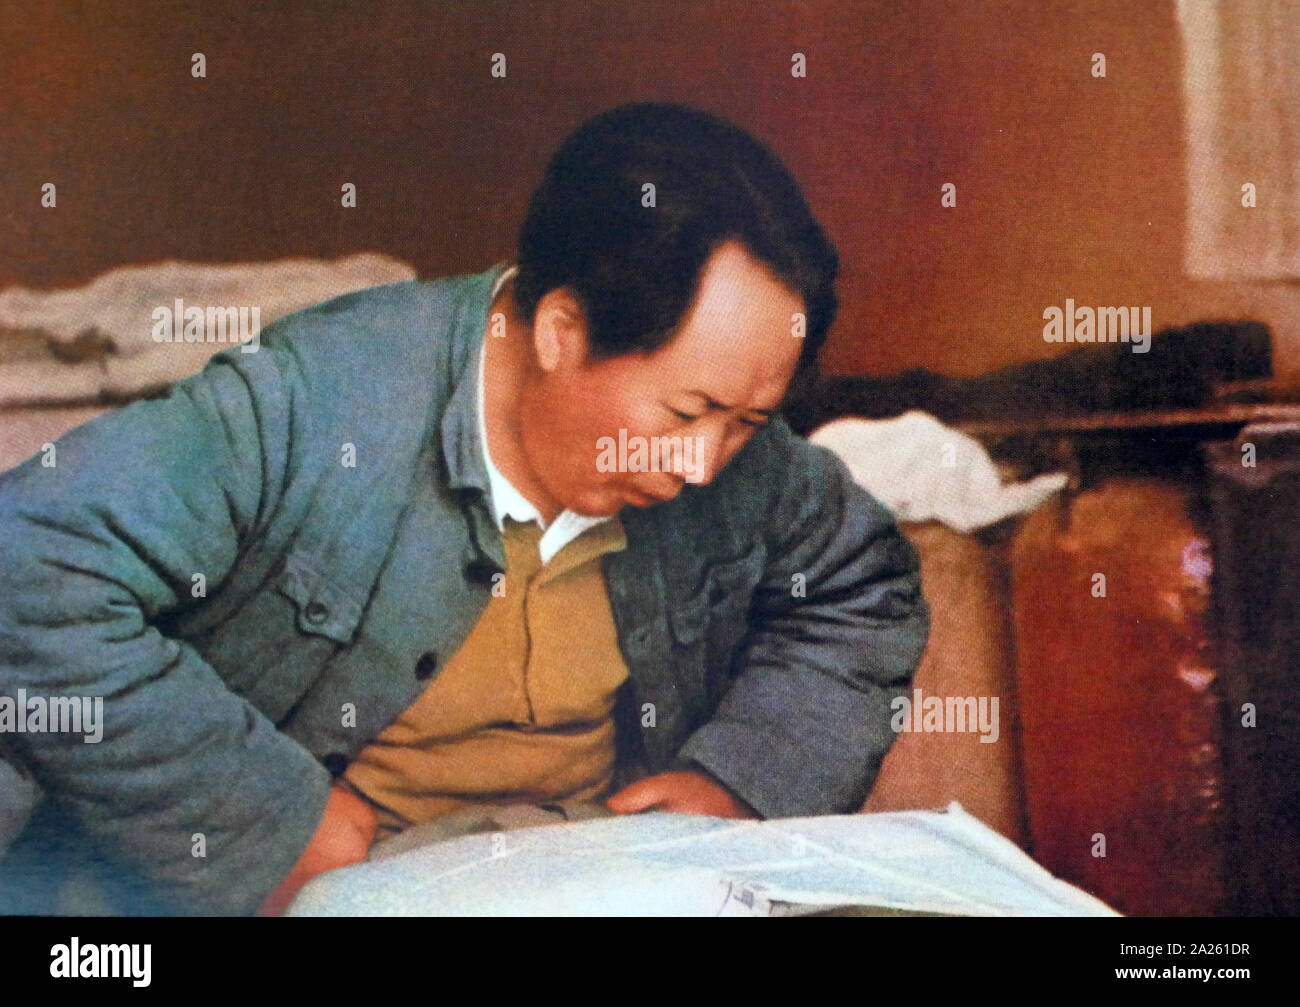 Chairman Mao reviews military maps in northern Shaanxi, 1947. Mao Zedong (1893 - September 9, 1976), was a Chinese communist revolutionary who became the founding father of the People's Republic of China (PRC), which he ruled as the Chairman of the Communist Party of China from its establishment in 1949 until his death Stock Photo